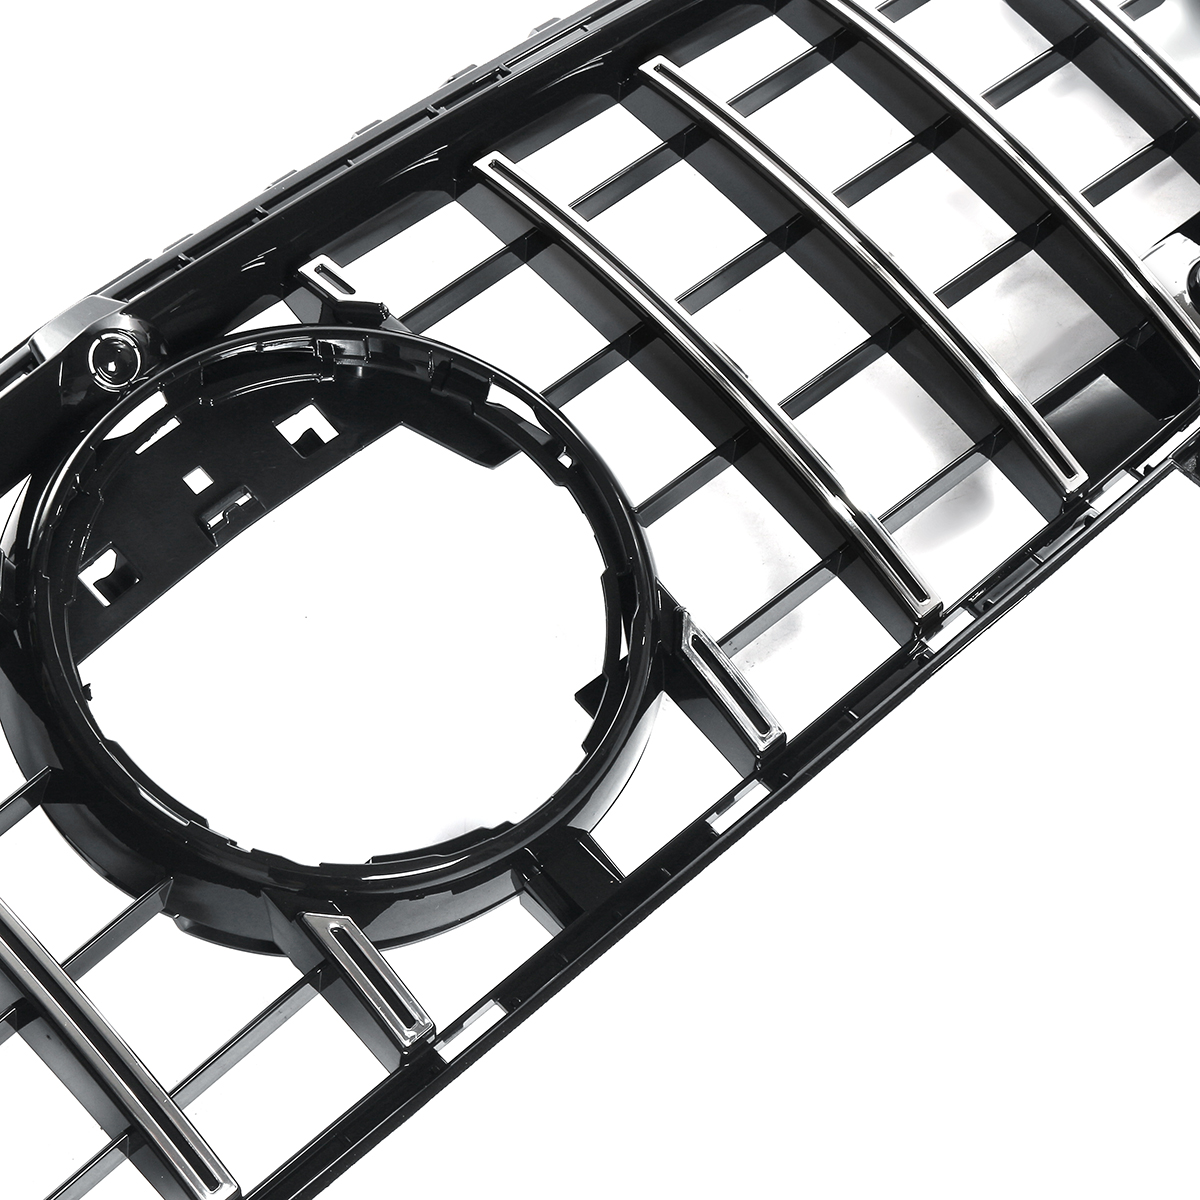 GT Style Chrome Front Bumper Grille Grill for Mercedes CLA Class CLA45 AMG 2020